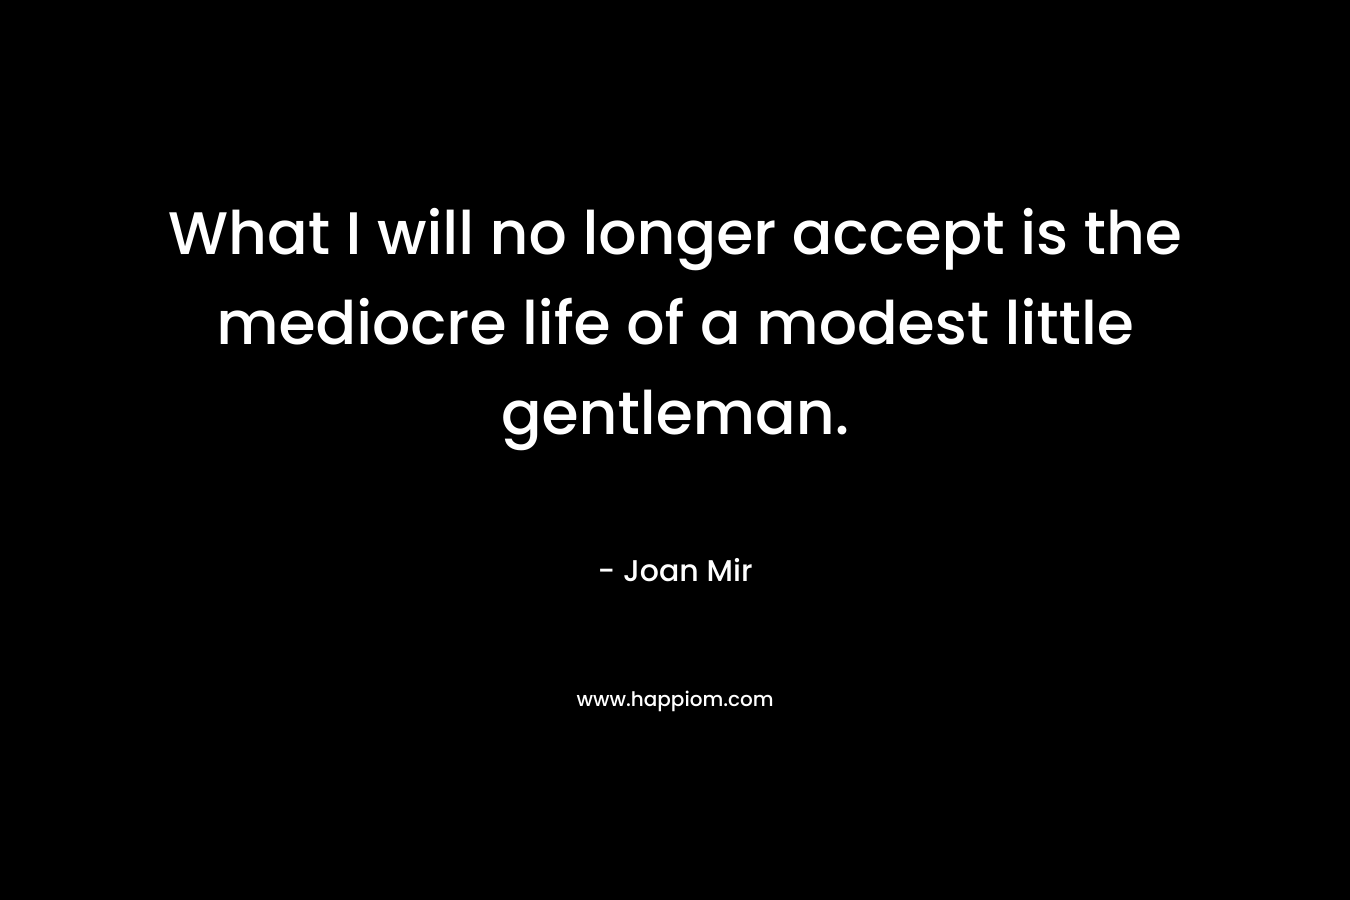 What I will no longer accept is the mediocre life of a modest little gentleman. – Joan Mir